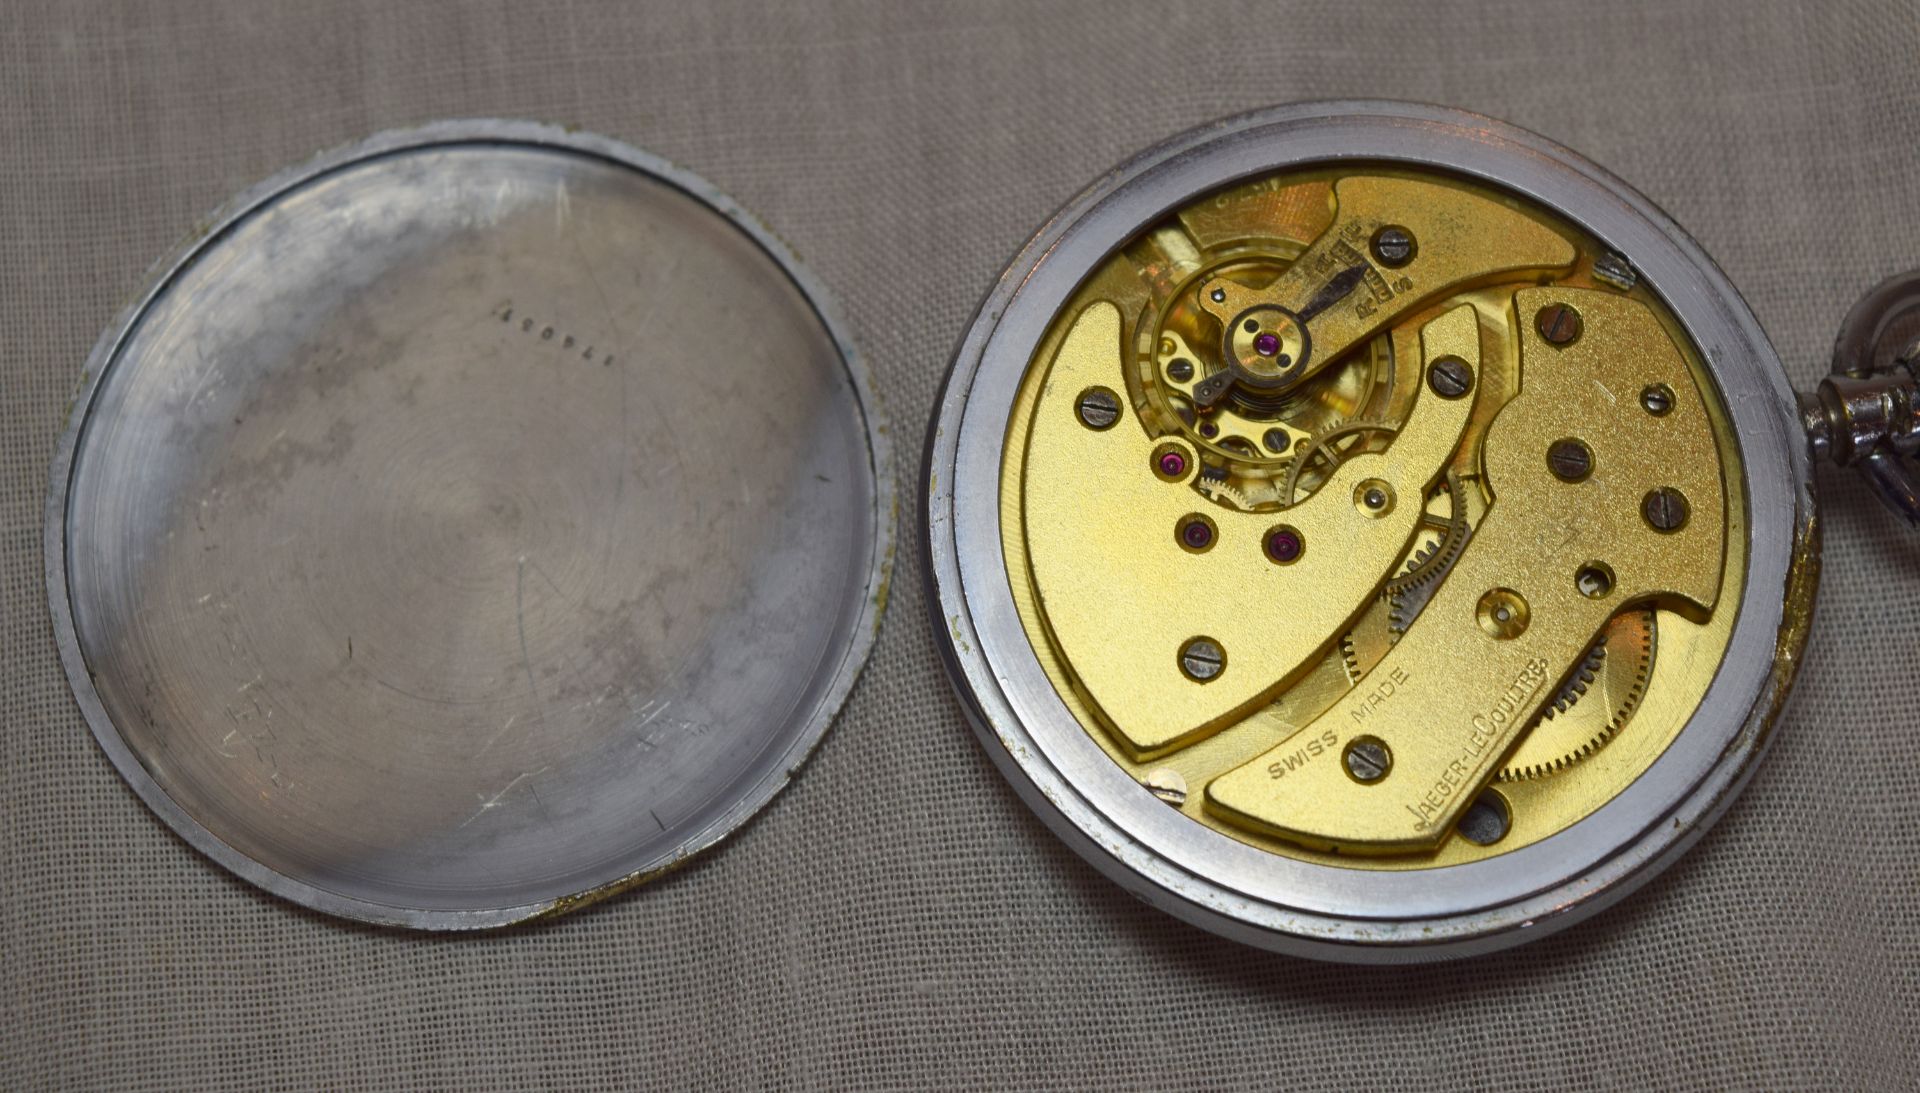 Jaeger LeCoultre WW2 Military Pocket Watch - Image 6 of 6